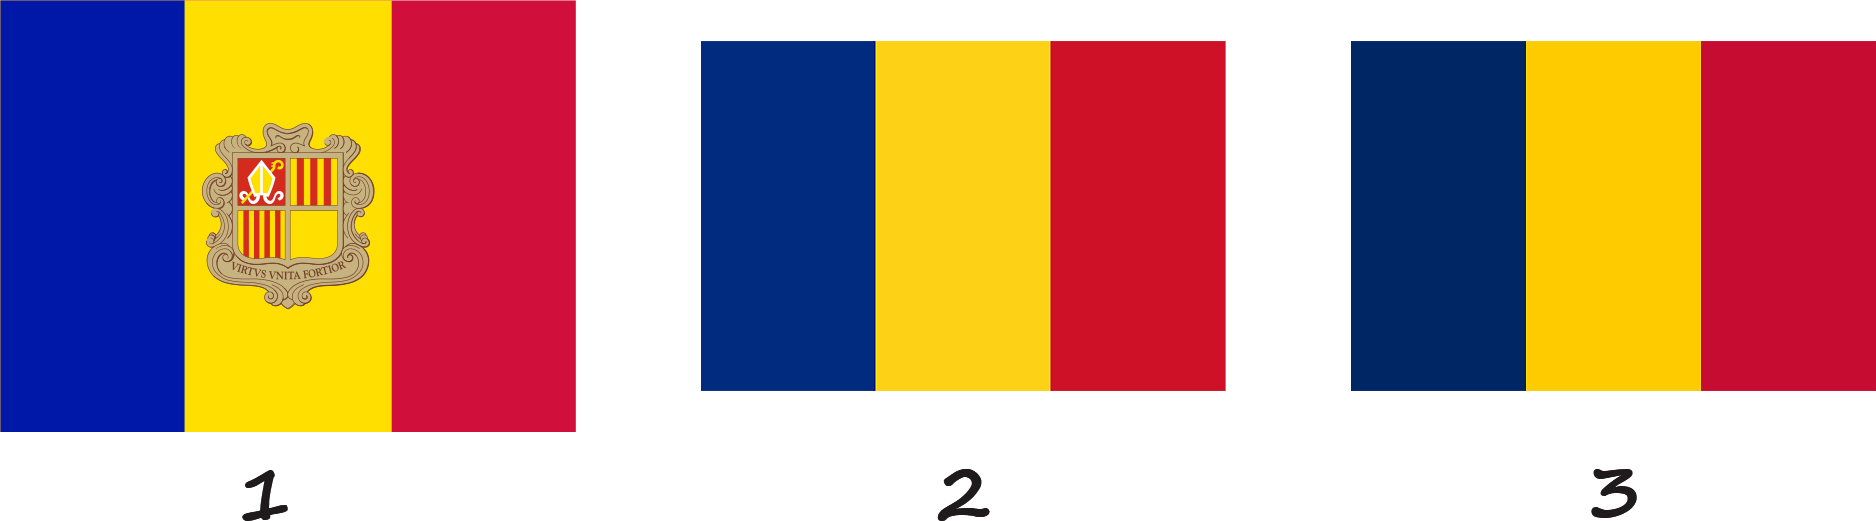 What flags are similar to the Moldovan flag?